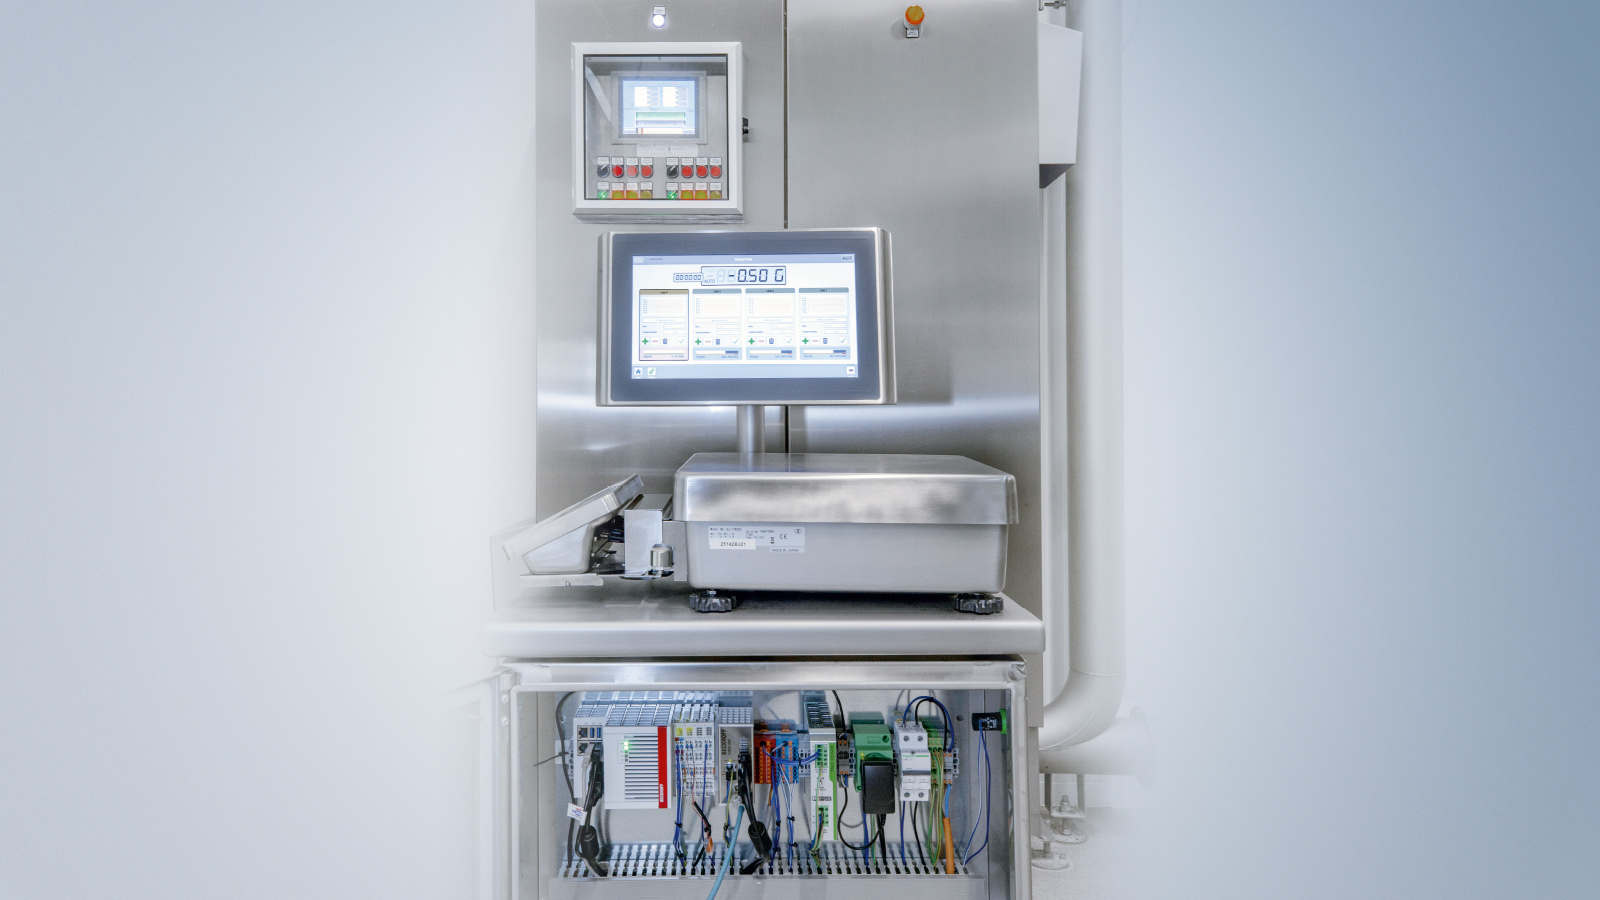 TwinCAT and a CX5240 Embedded PC (below) combined with a CP3916 Control Panel in stainless steel (center) facilitate the integration of data from all possible systems, such as this floor scale, and thus form the backbone of a cloud-based solution.